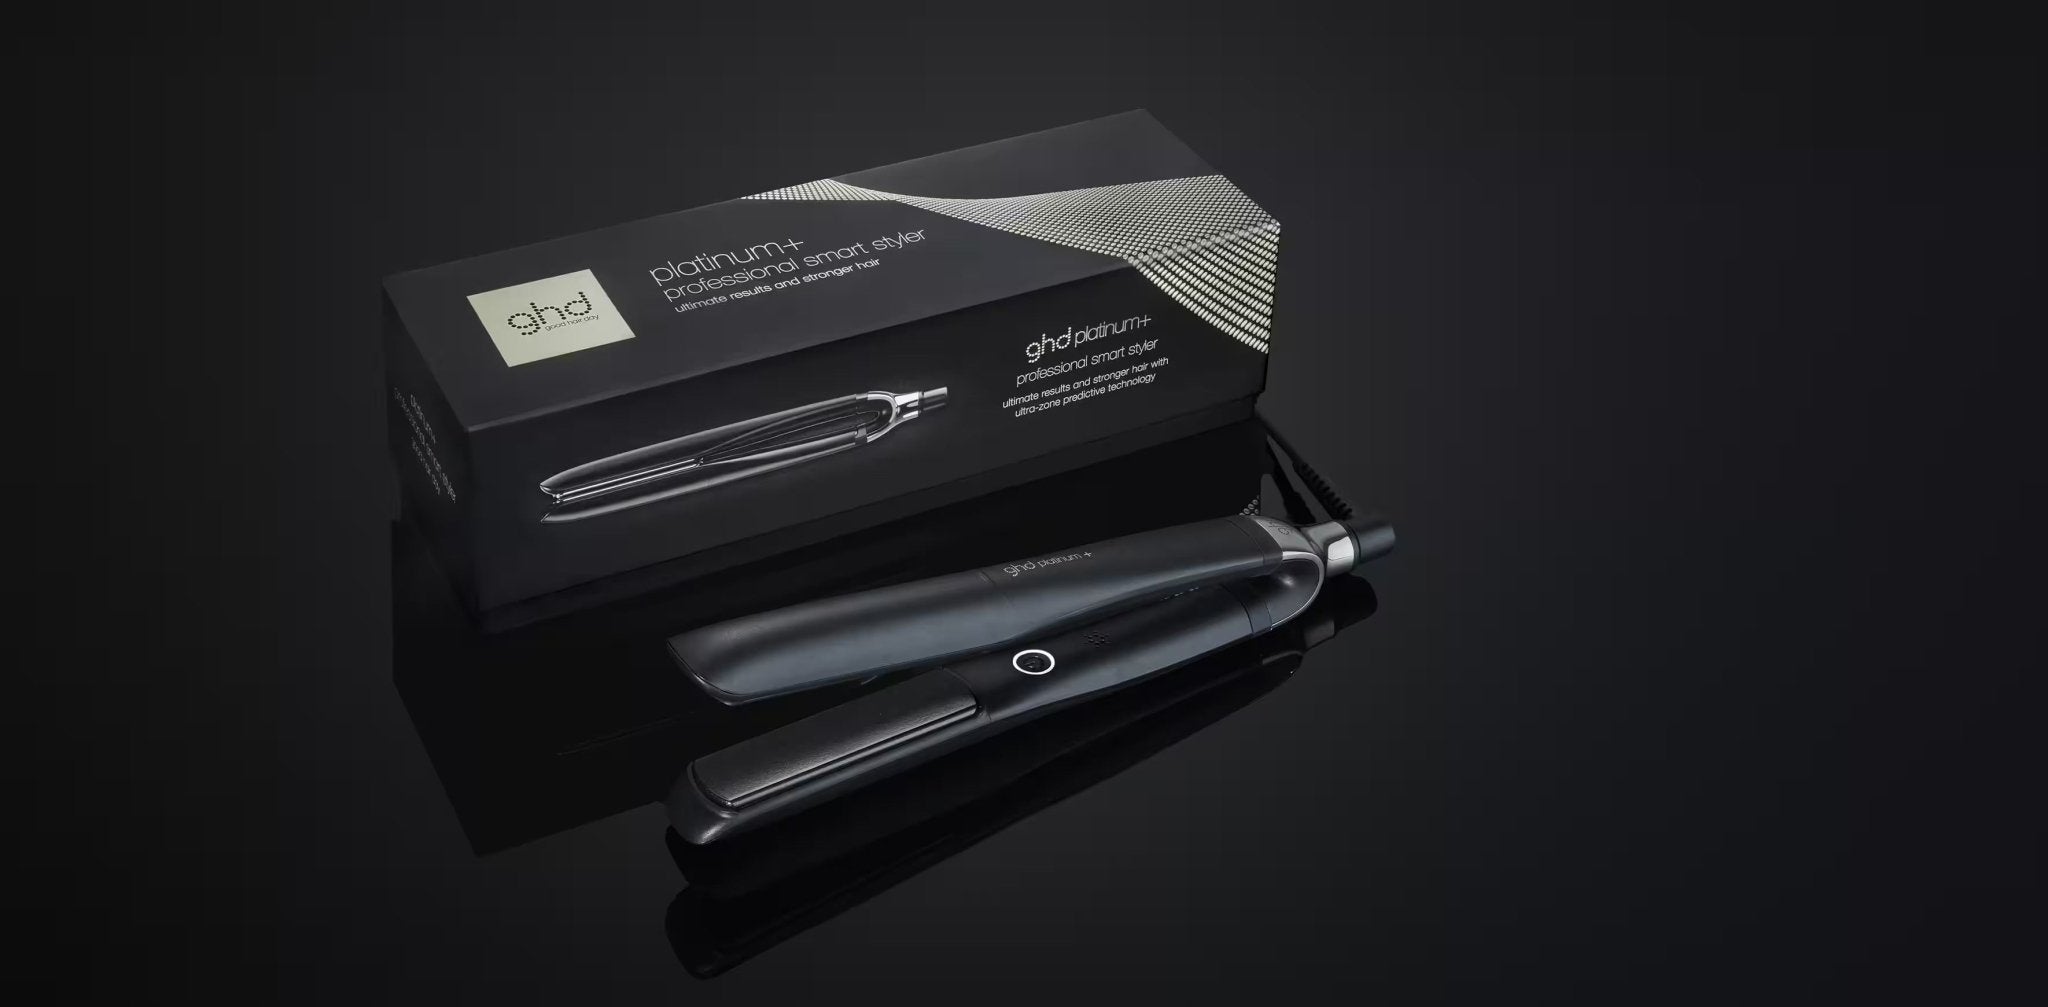 A black GHD PLATINUM+ STYLER - 1" FLAT IRON, designed for personalized results, is placed next to its packaging box against a dark background.